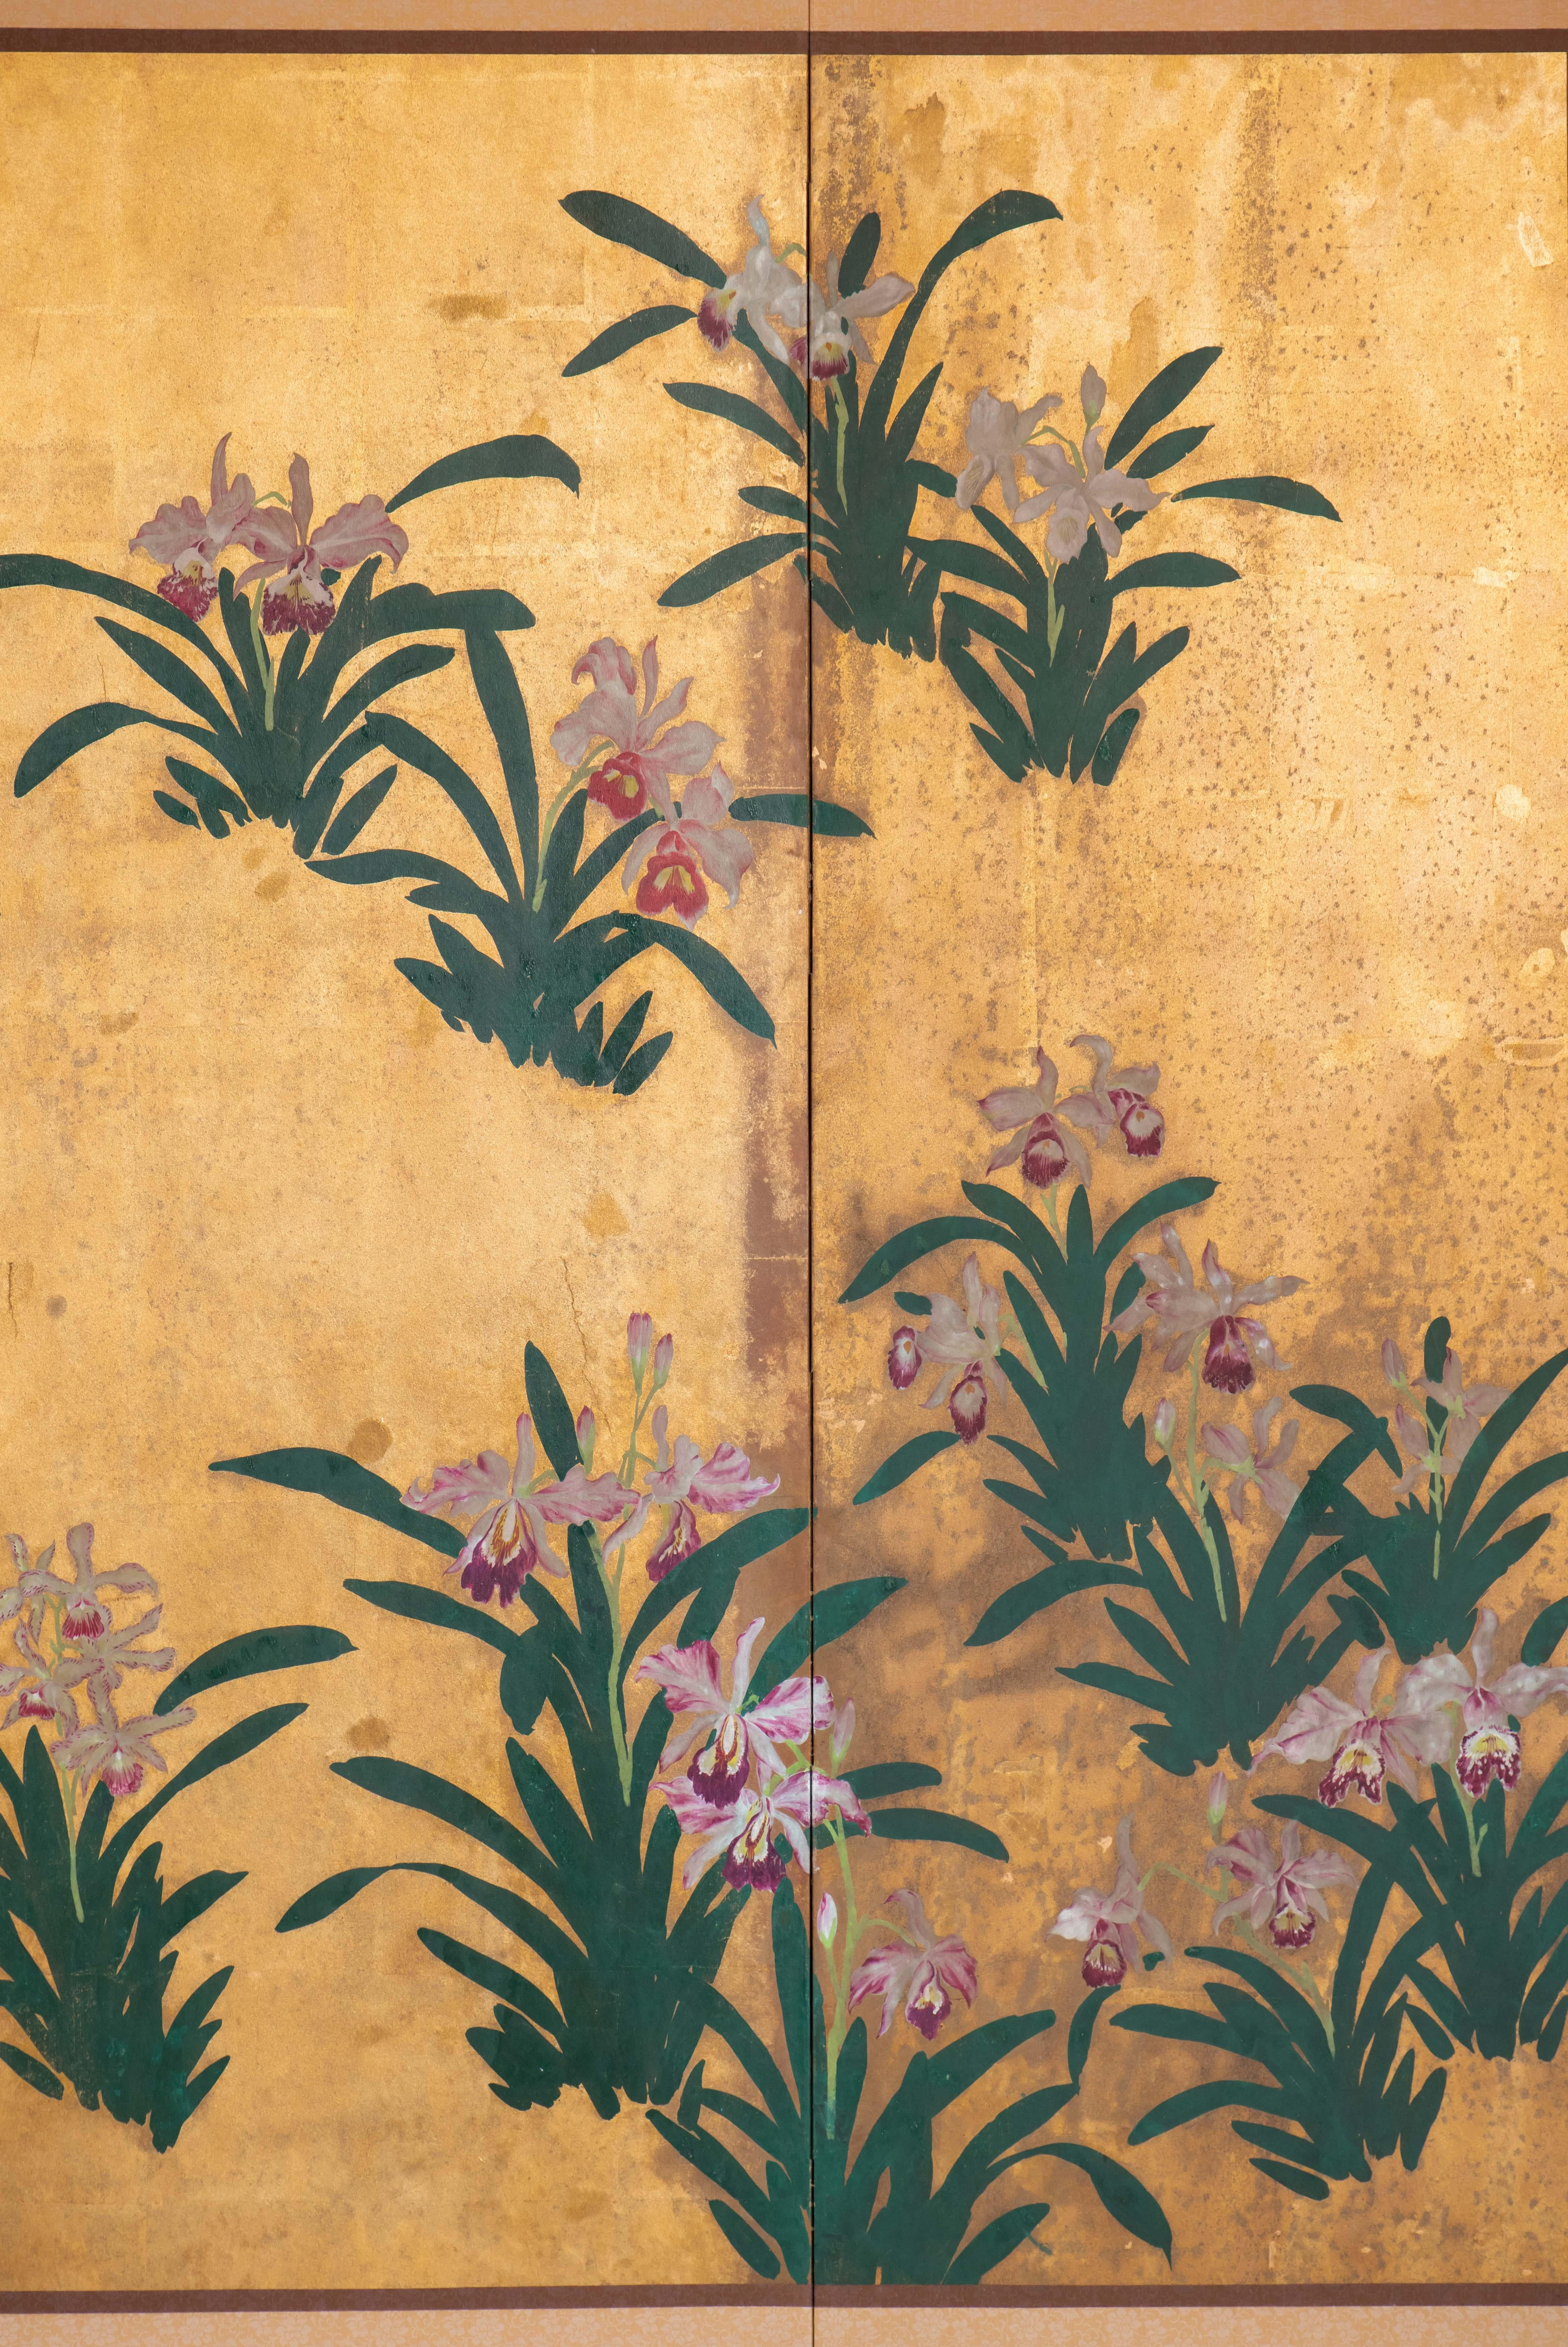 Contemporary Hand-Painted Japanese Folding Screen Byobu of Scattered Orchids